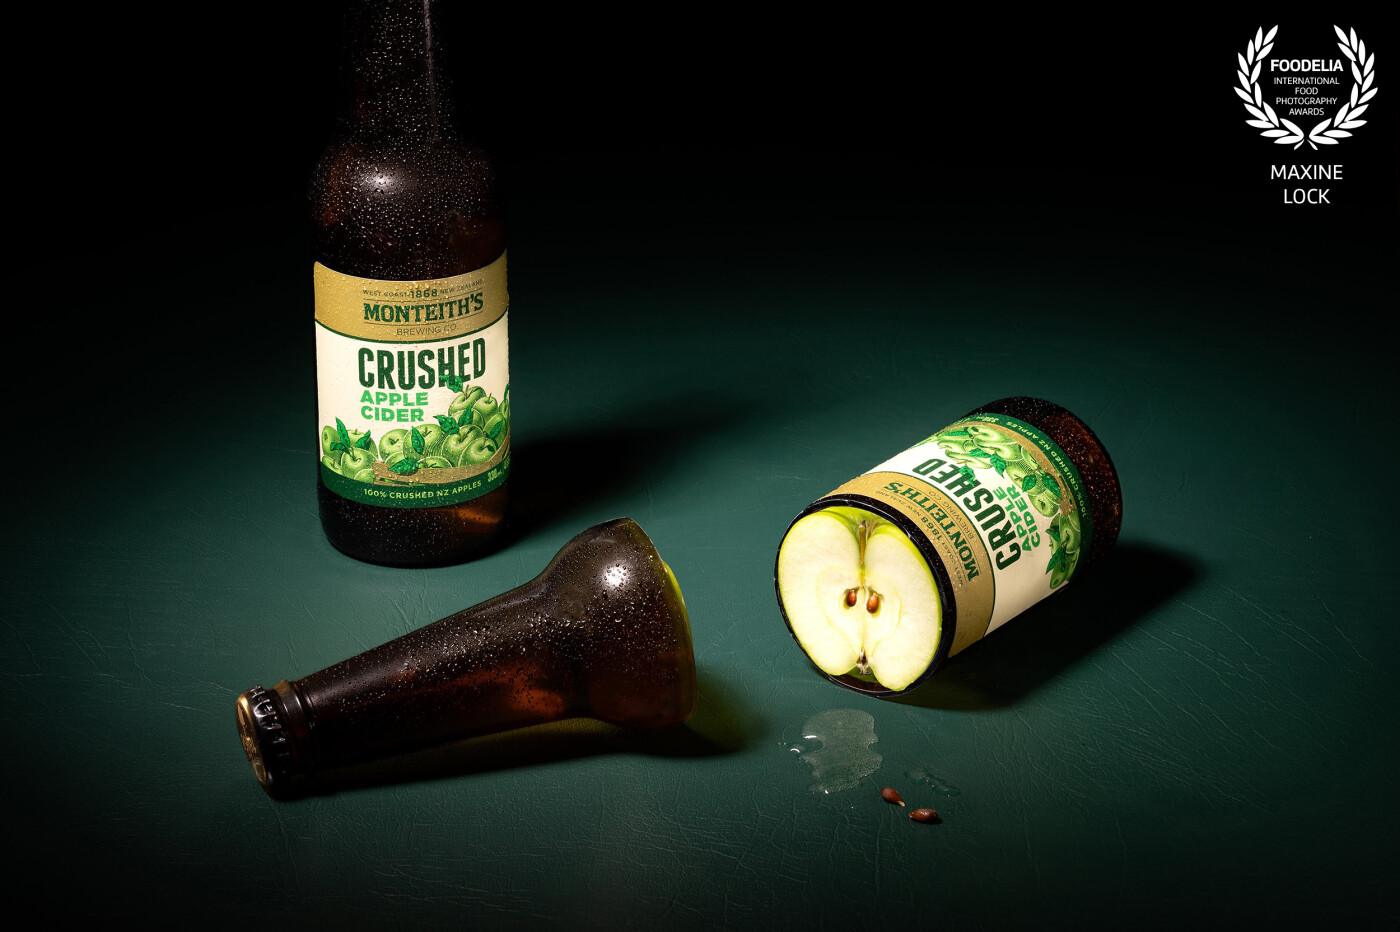 An apple cider bottle "sliced" opened and ready to be served! This time on a moody green textured background, for a little something extra!